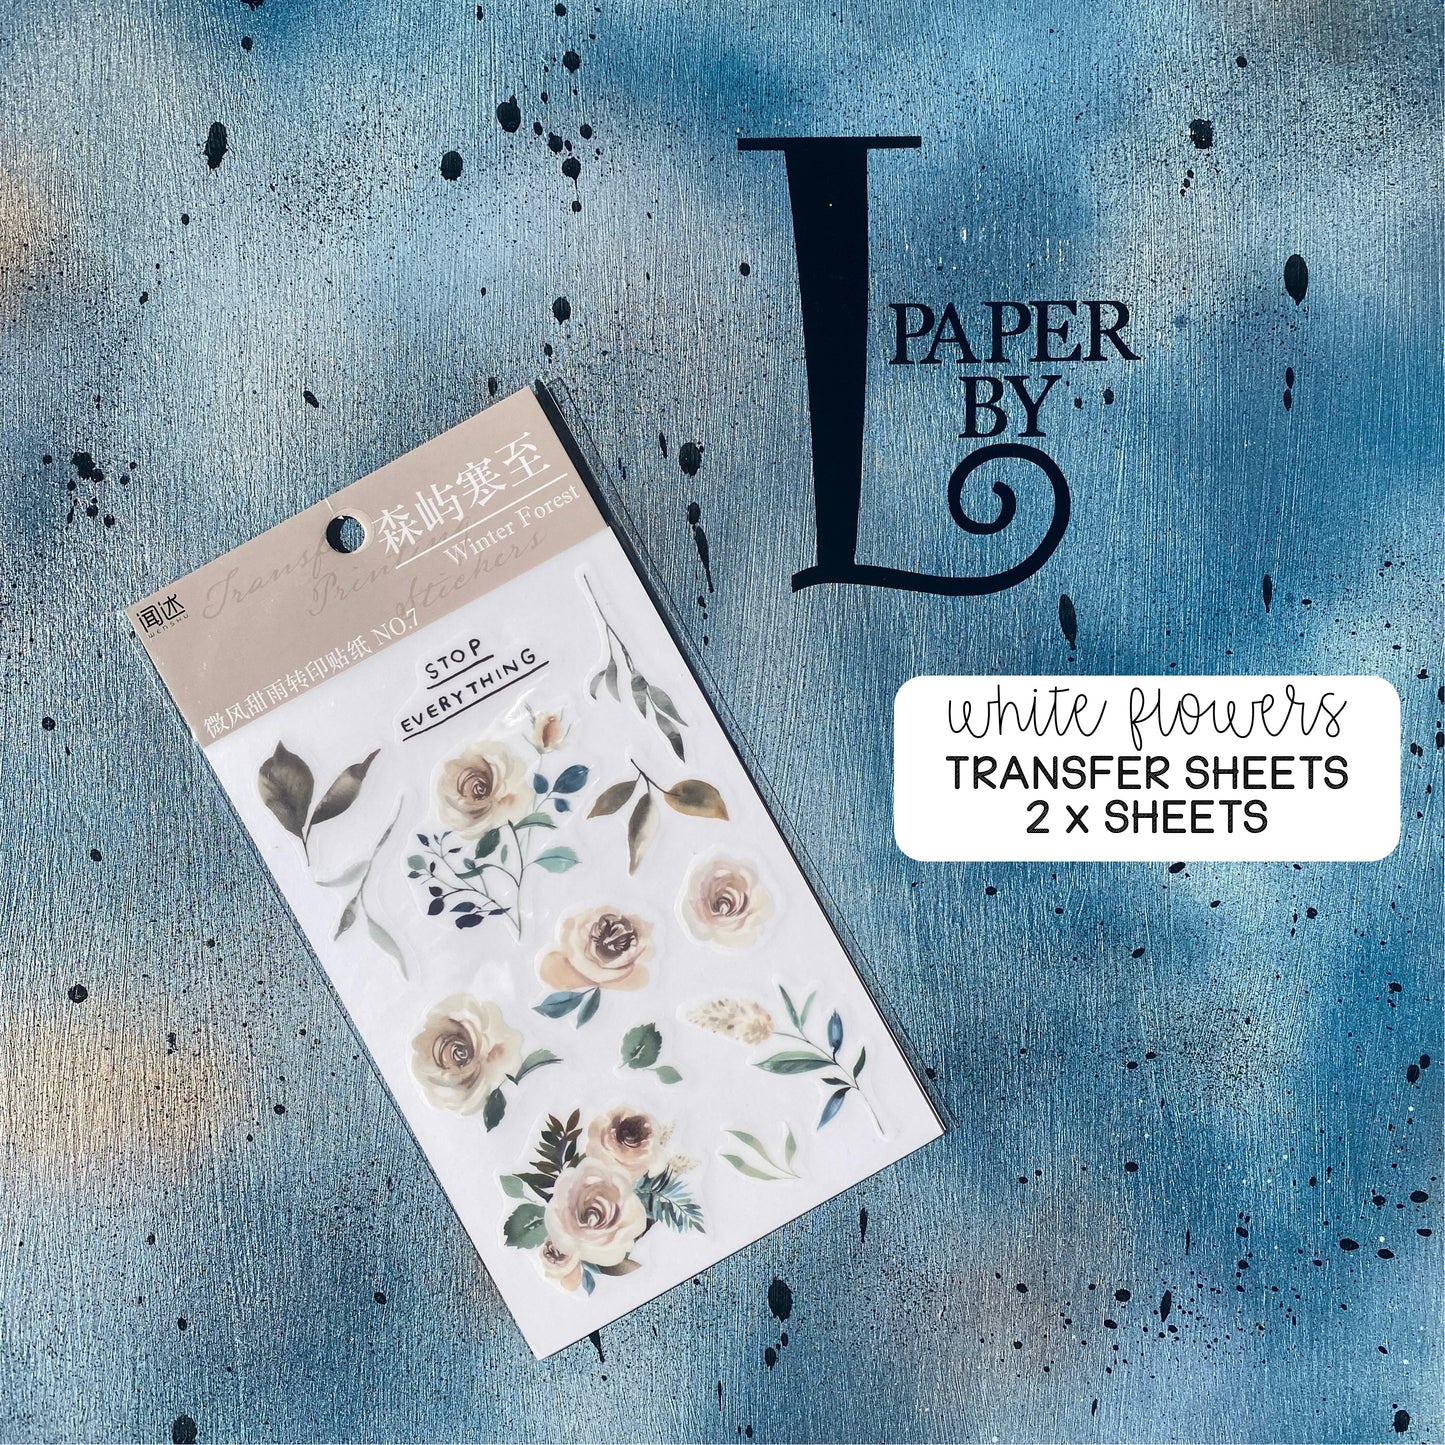 Transfer Sheets - Paper by L *